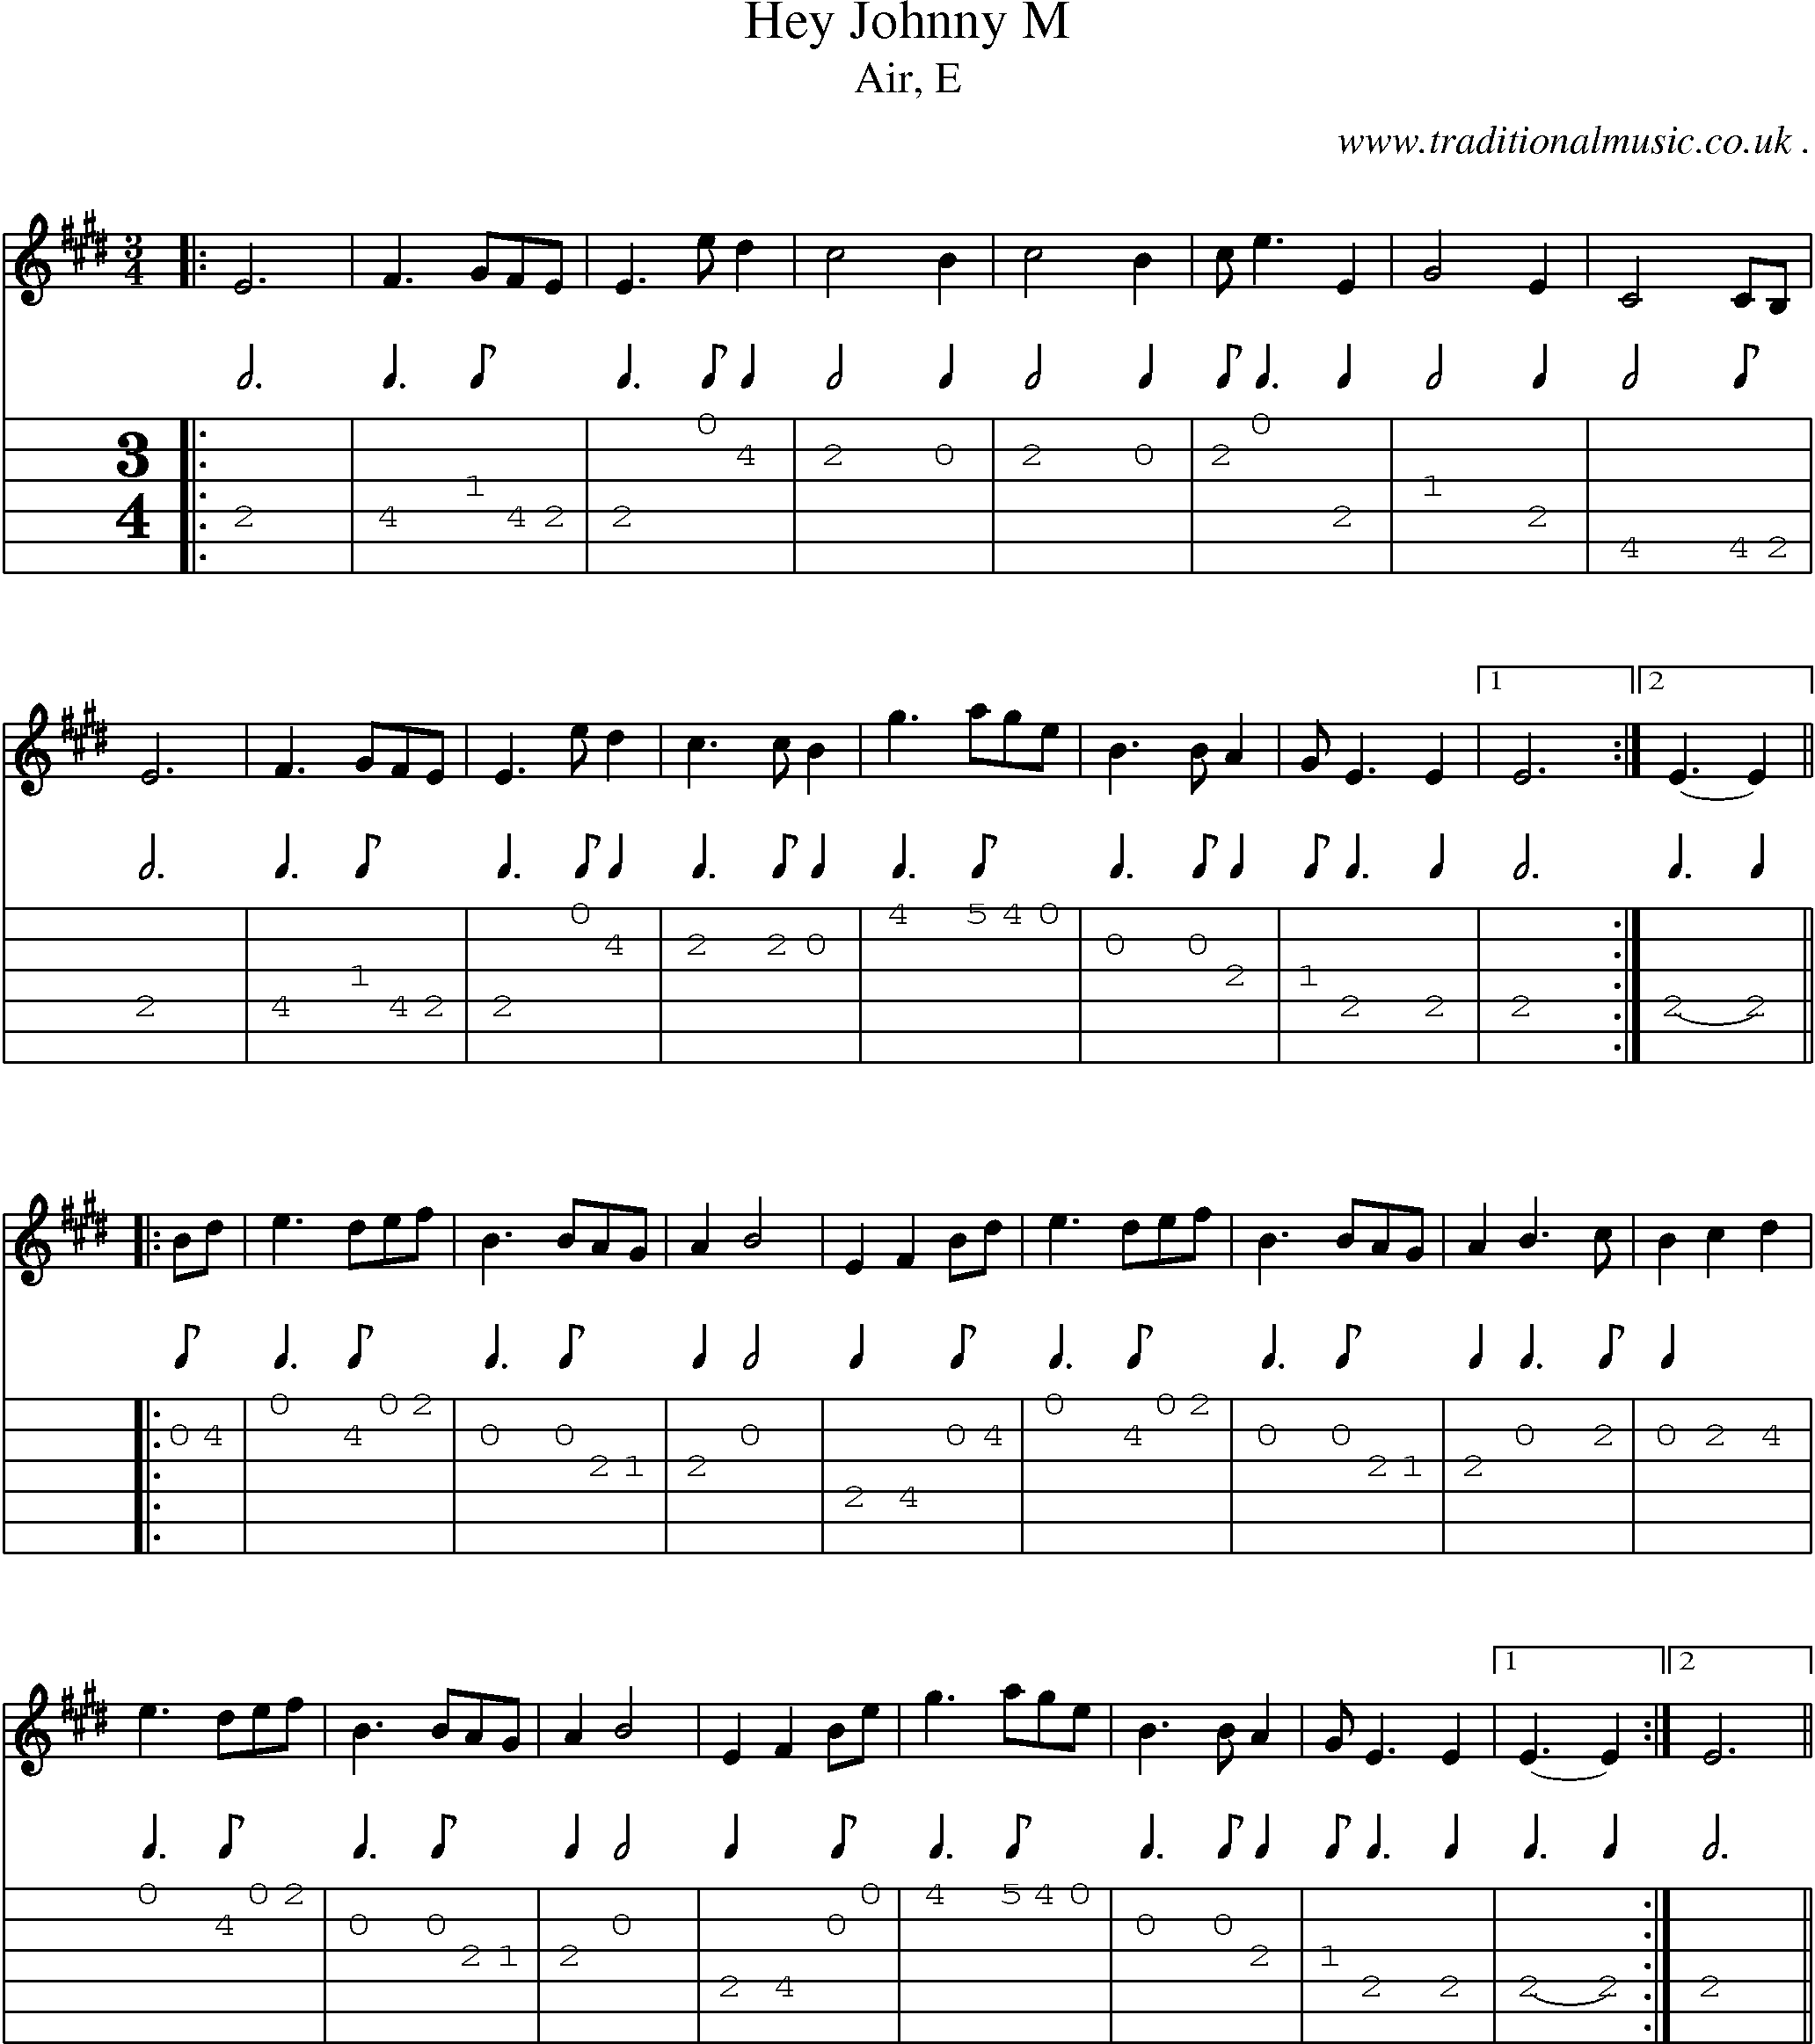 Sheet-music  score, Chords and Guitar Tabs for Hey Johnny M